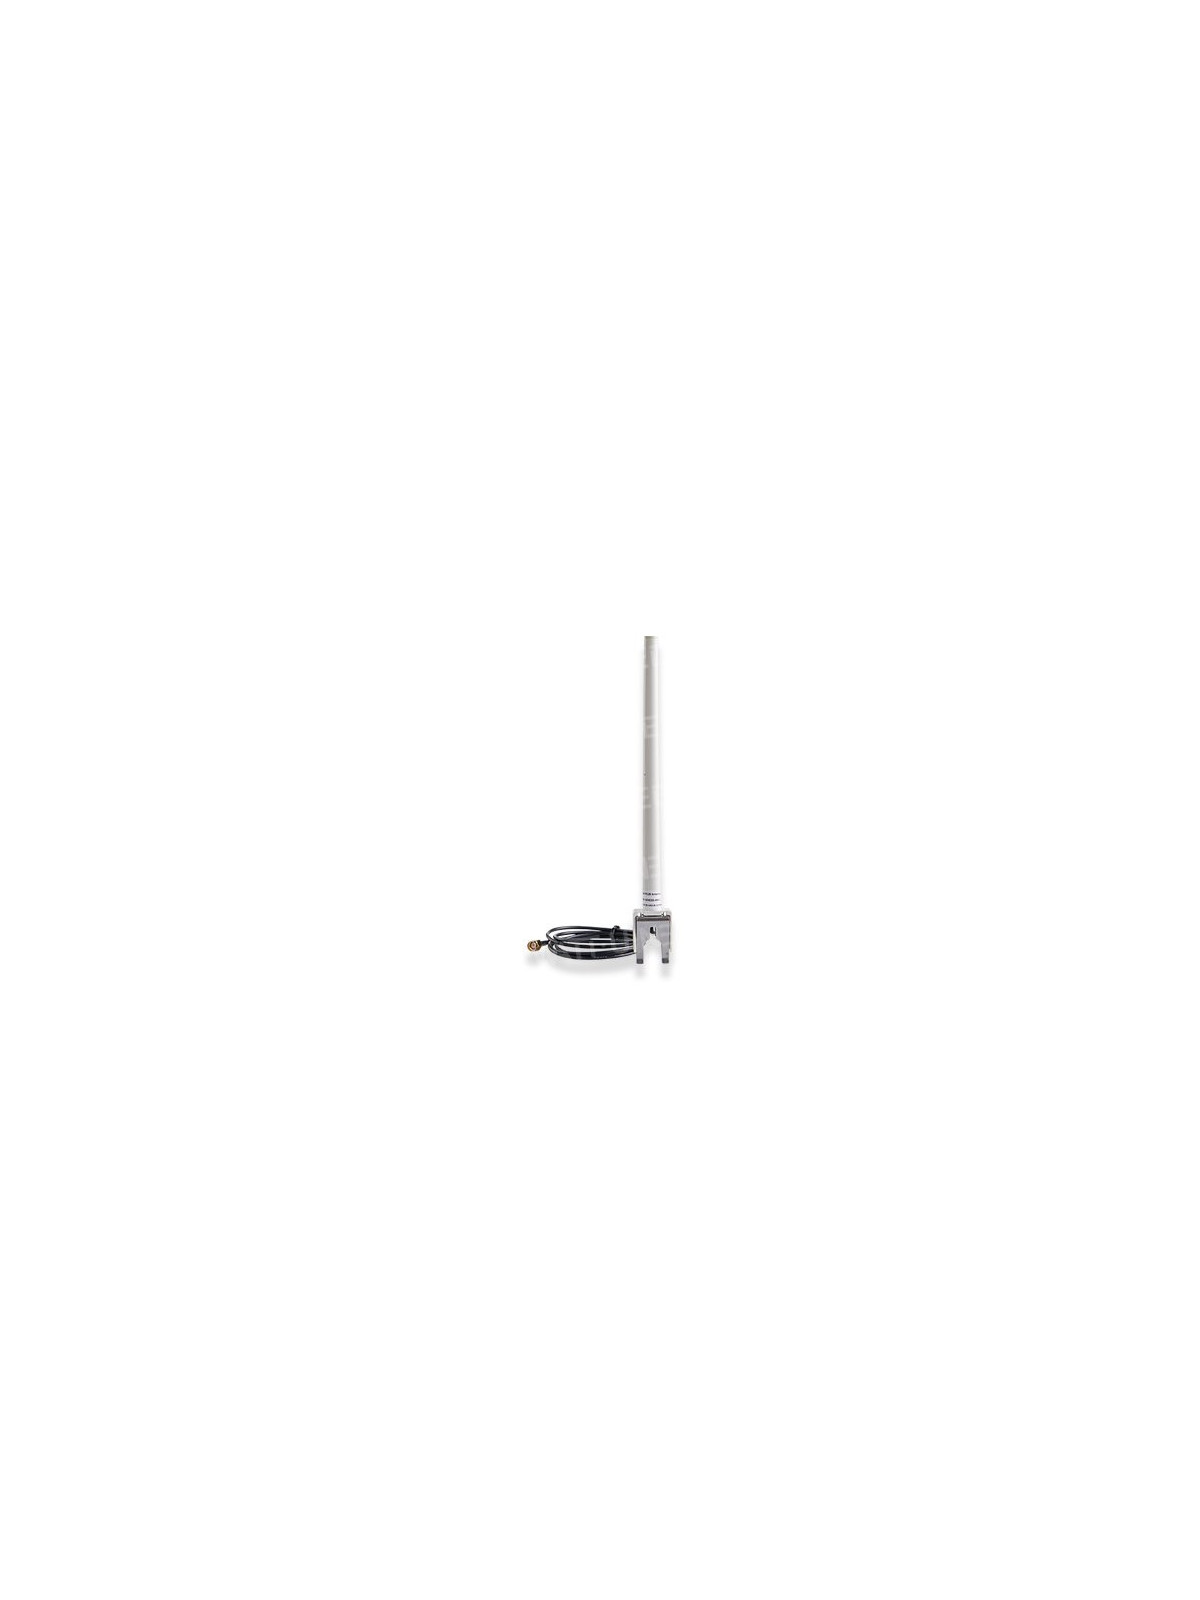 SolarEdge® antenna for Wi-Fi and ZigBee® communication